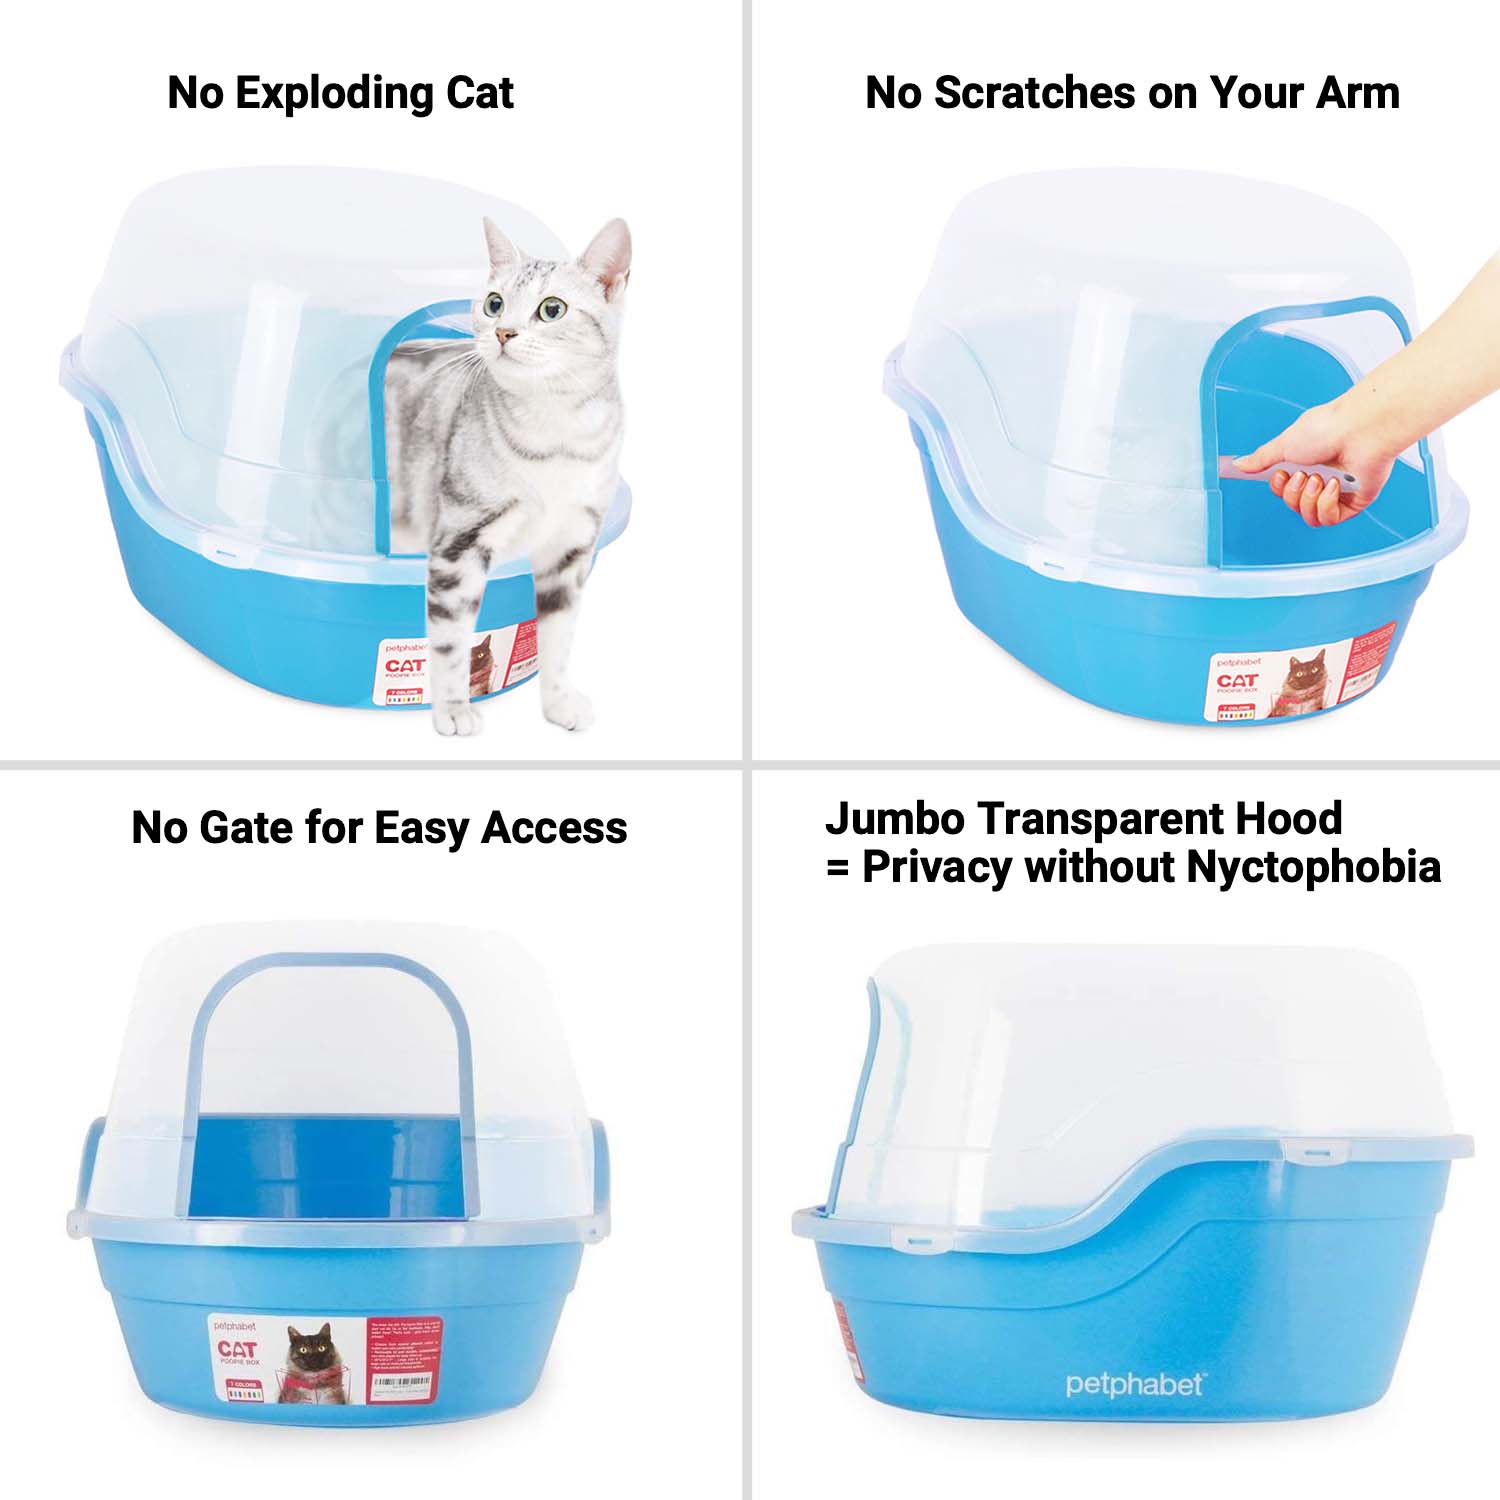 Jumbo Hooded Cat Litter Box - Extra Large for Big Cats and Multi-cat Families